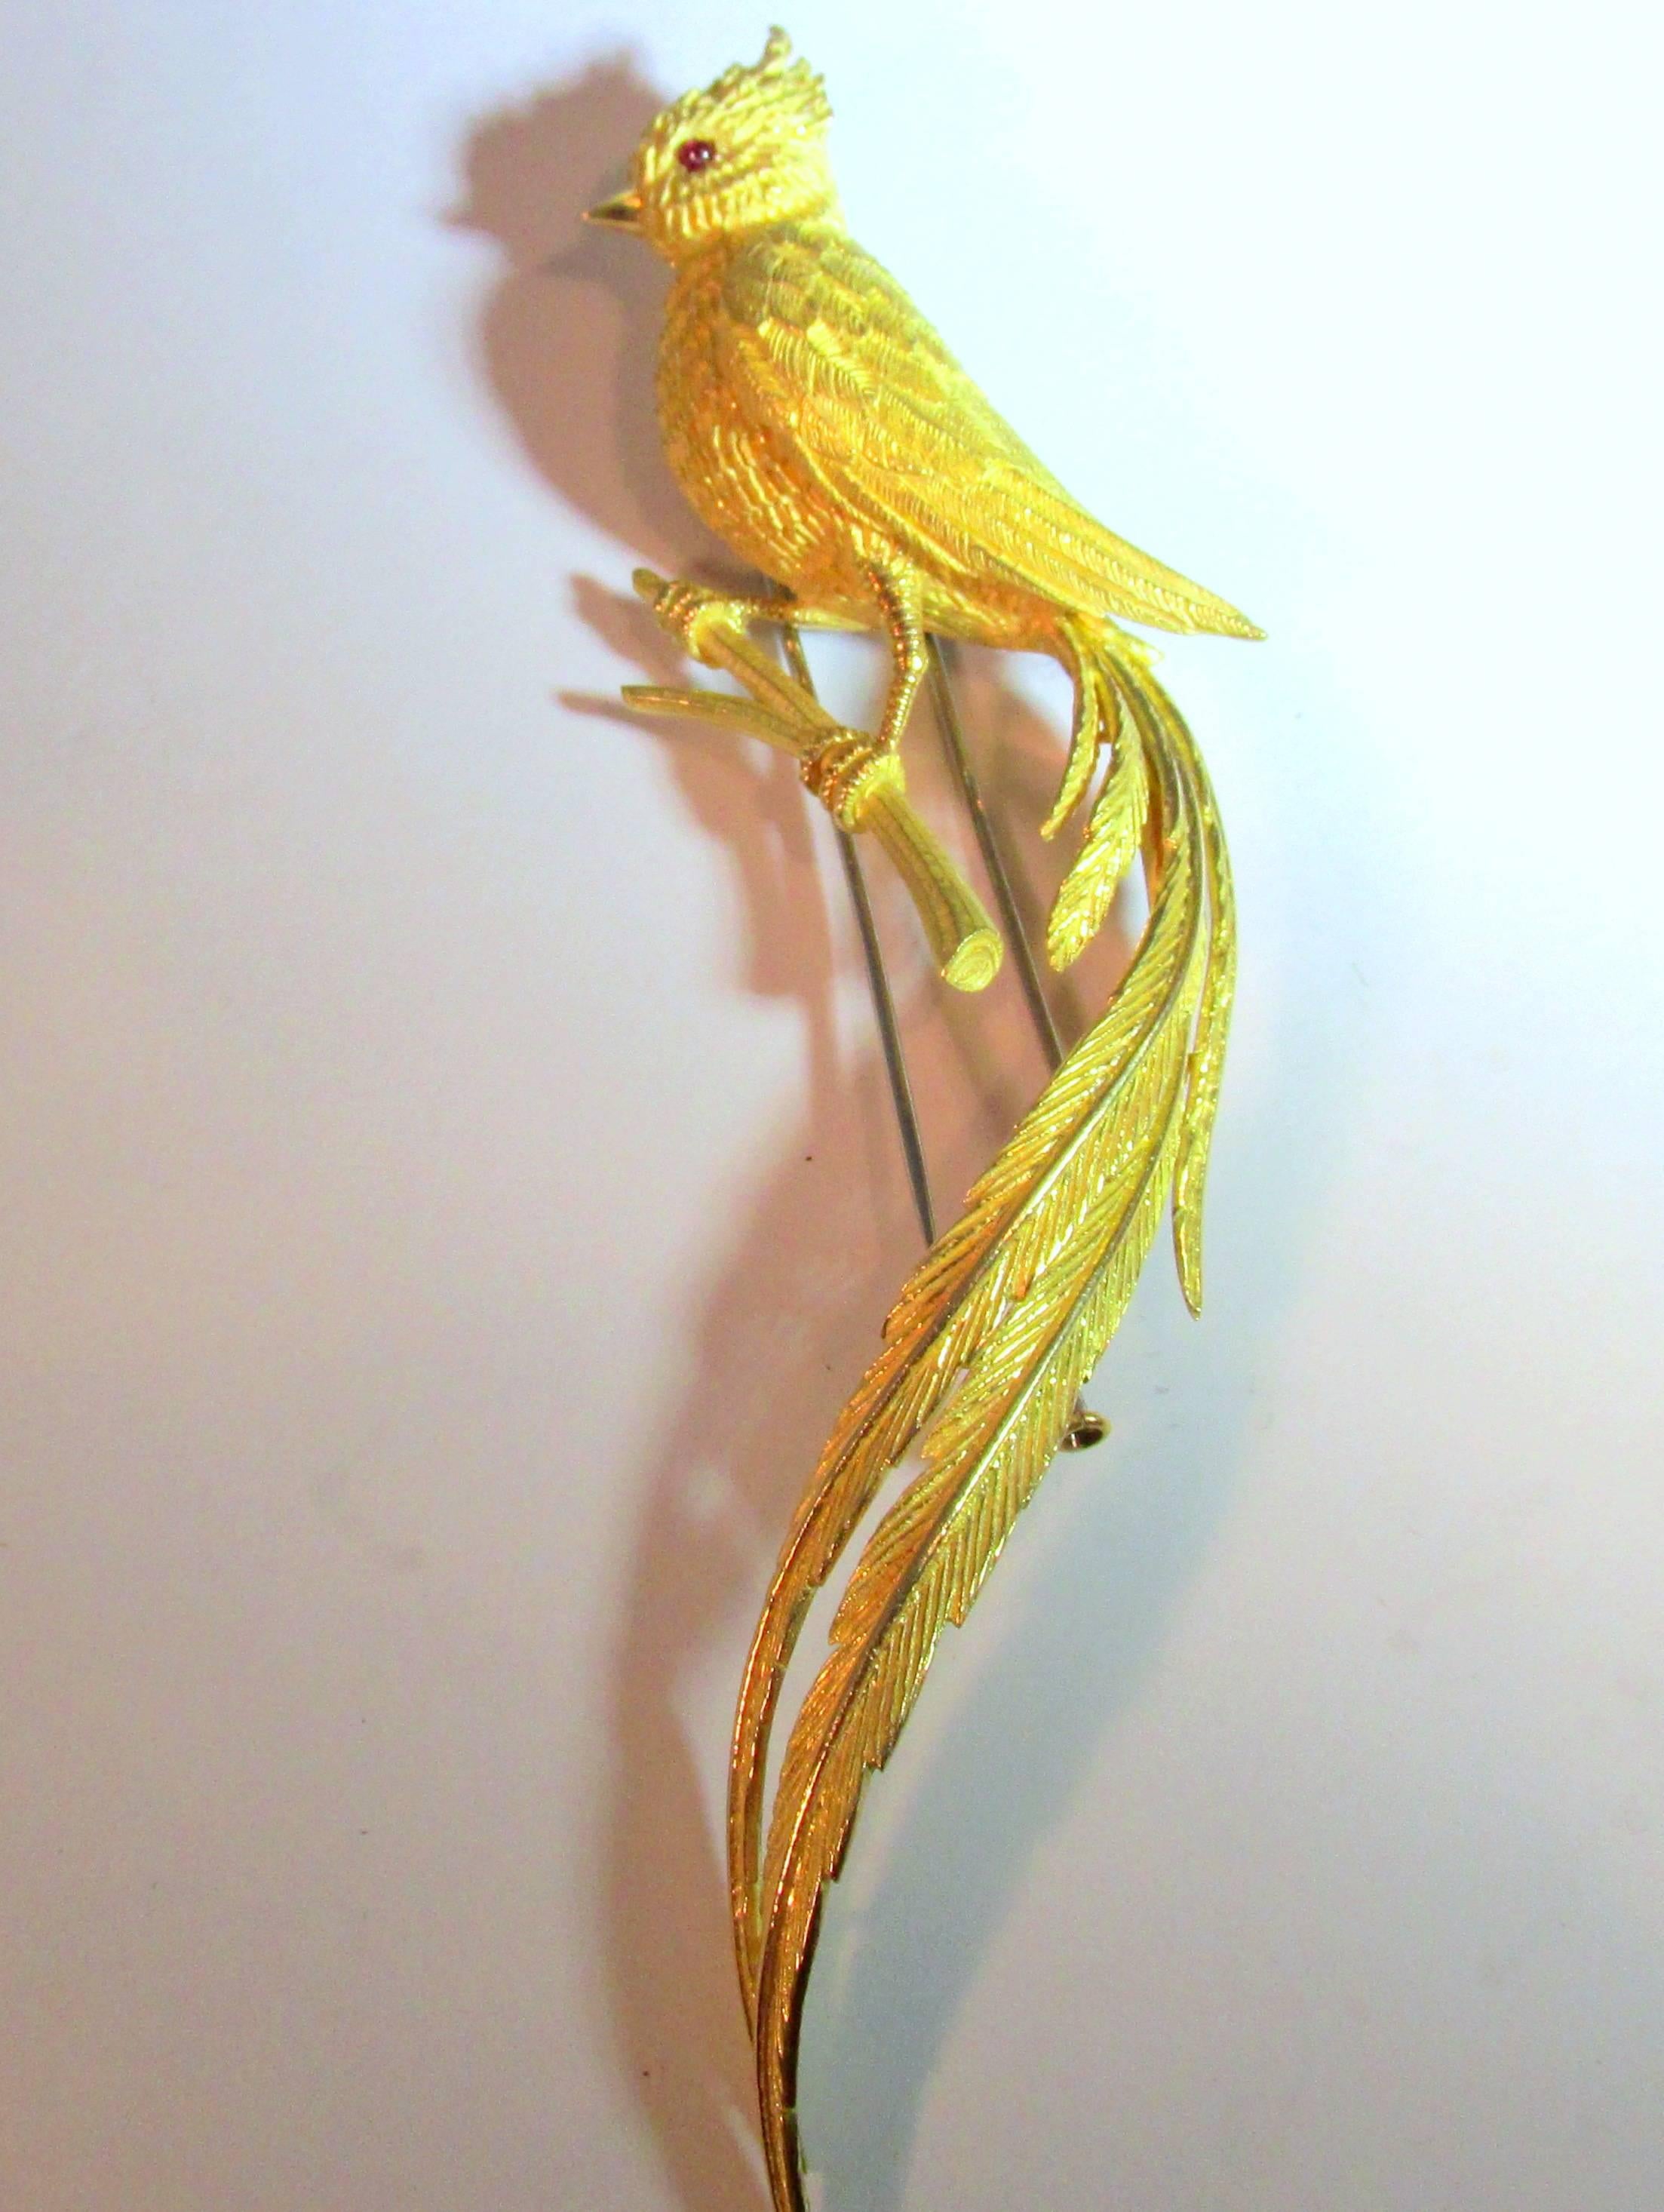 This is a well executed bird of paradise on a branch.  The bird is realistically hand carved with a small ruby eye and  flamboyant tail feathers.  It has a double prong brooch attachment on the verso.